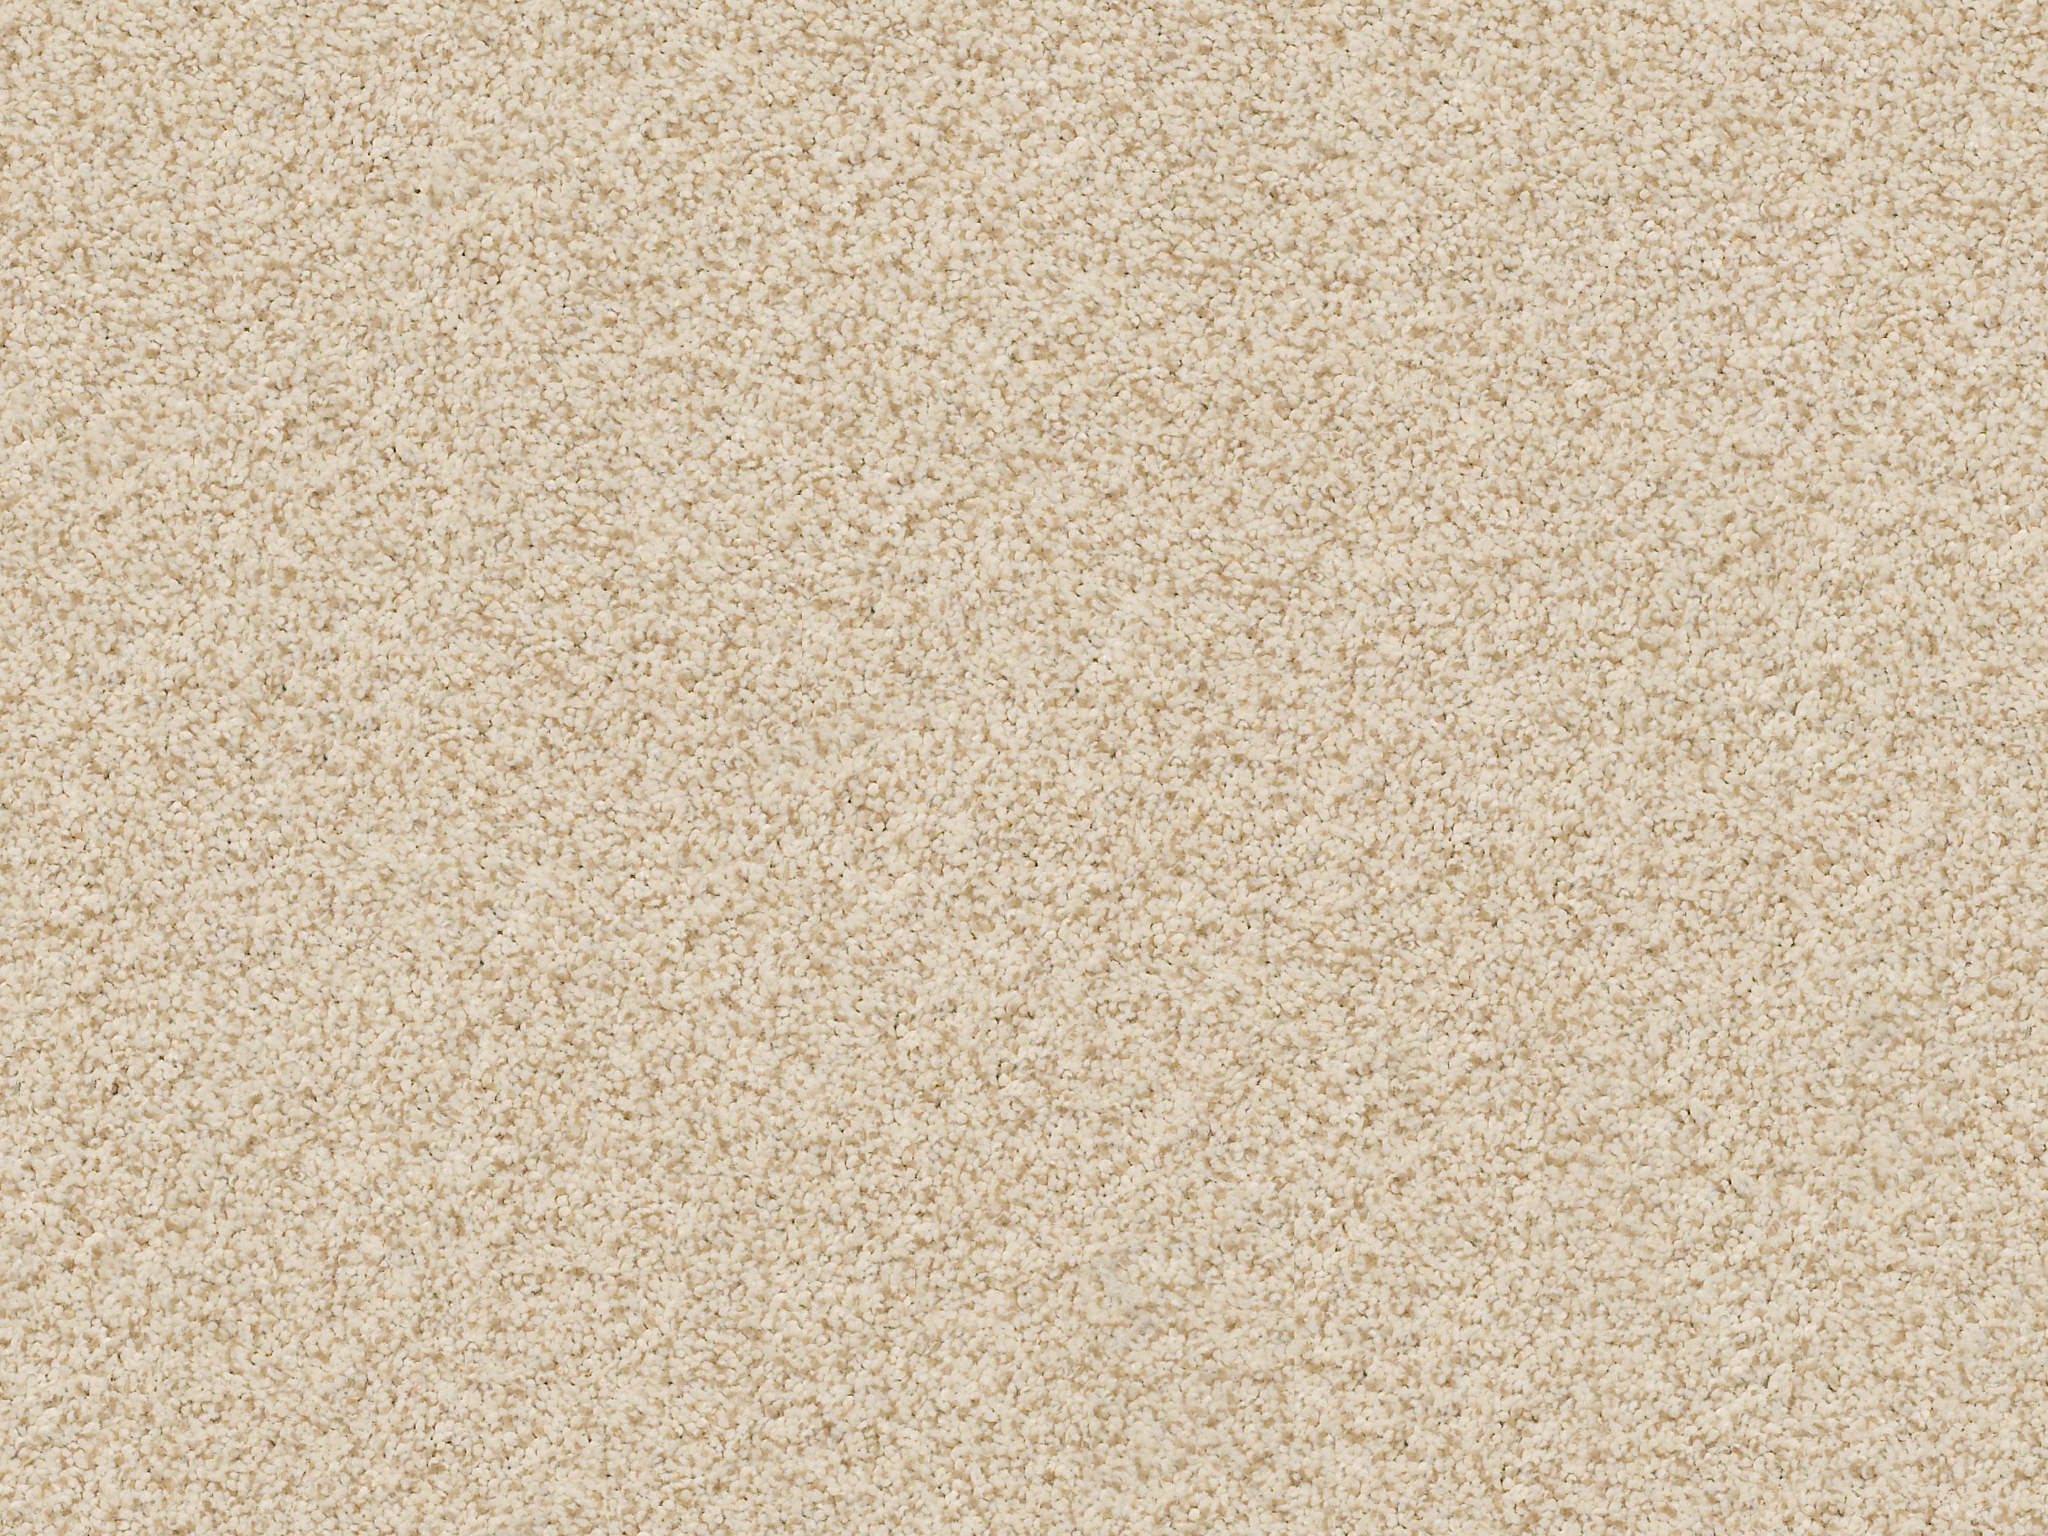 Serenity Cove Carpet - Windswept Zoomed Swatch Image